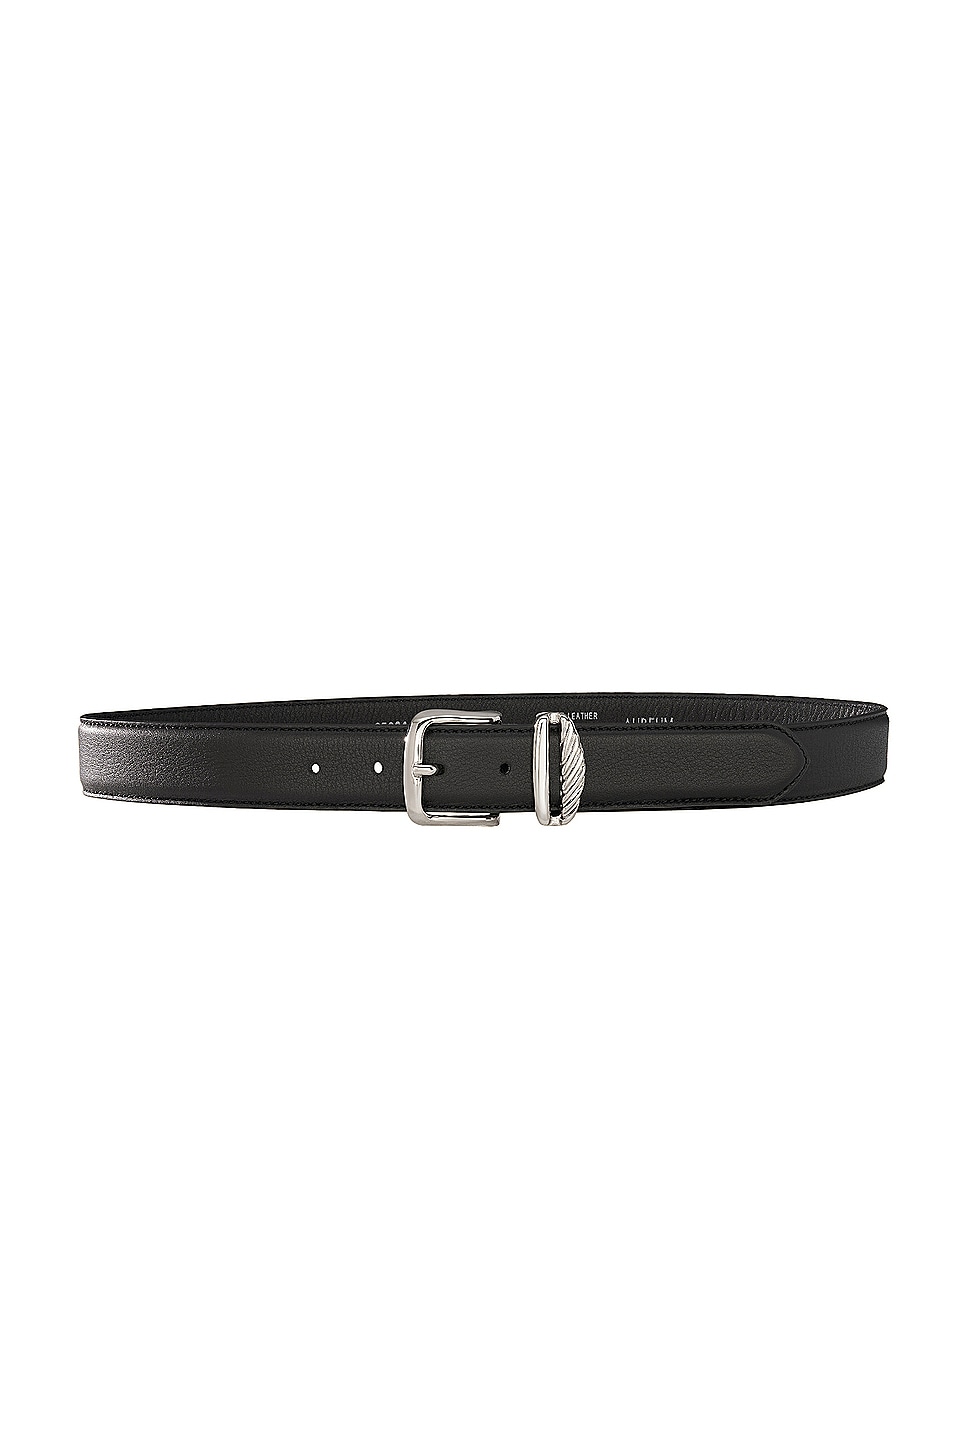 French Rope Belt in Black